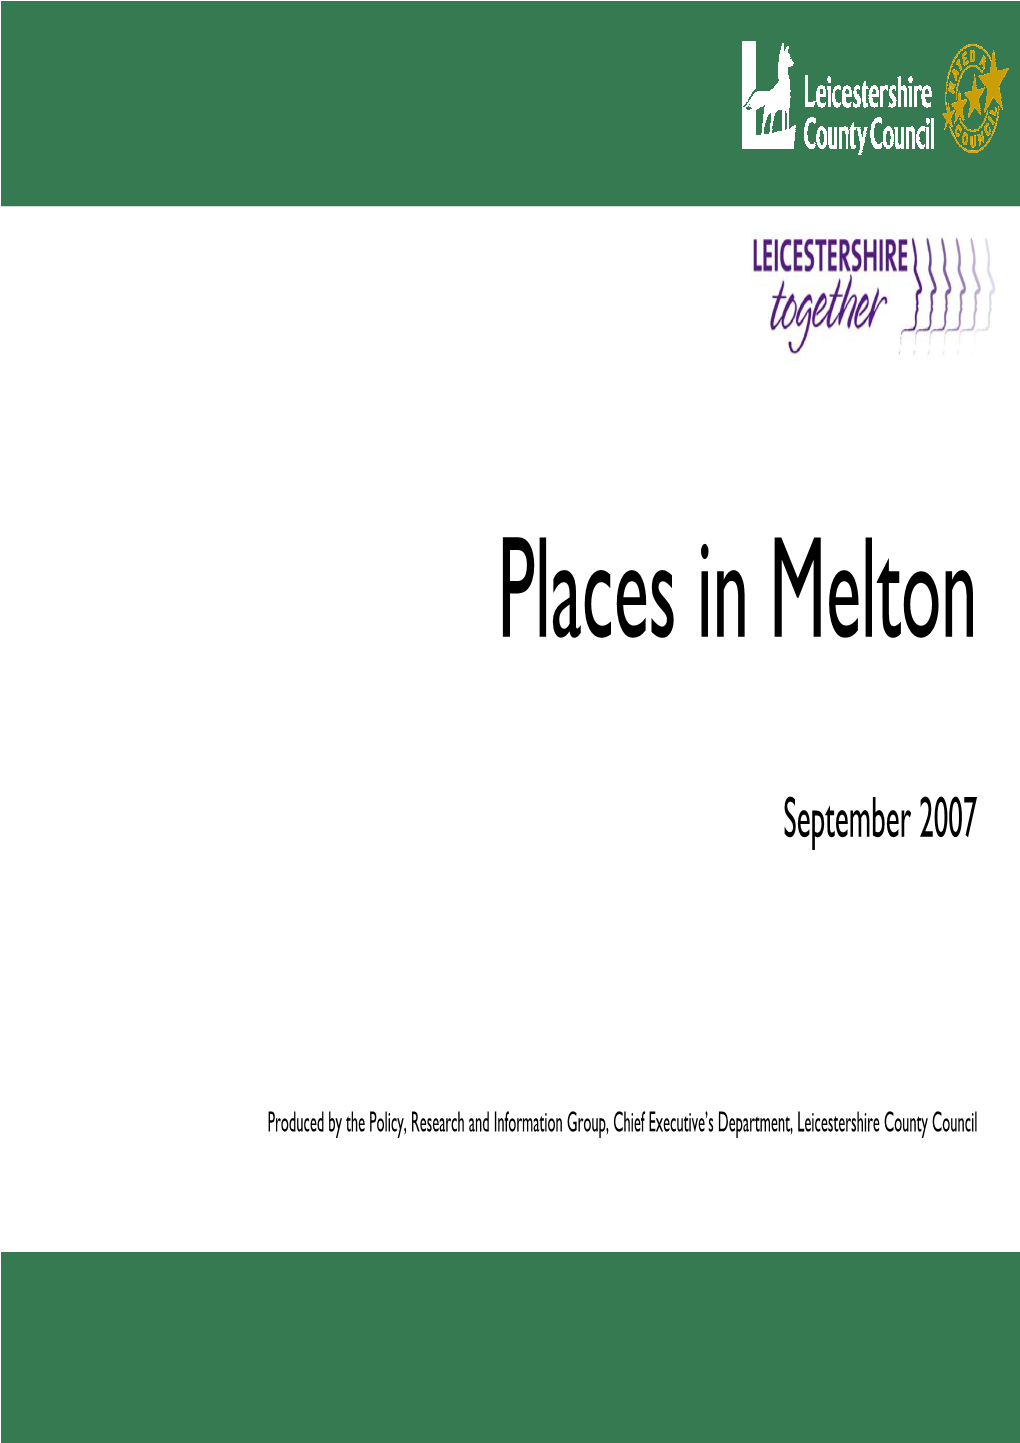 Places in Melton